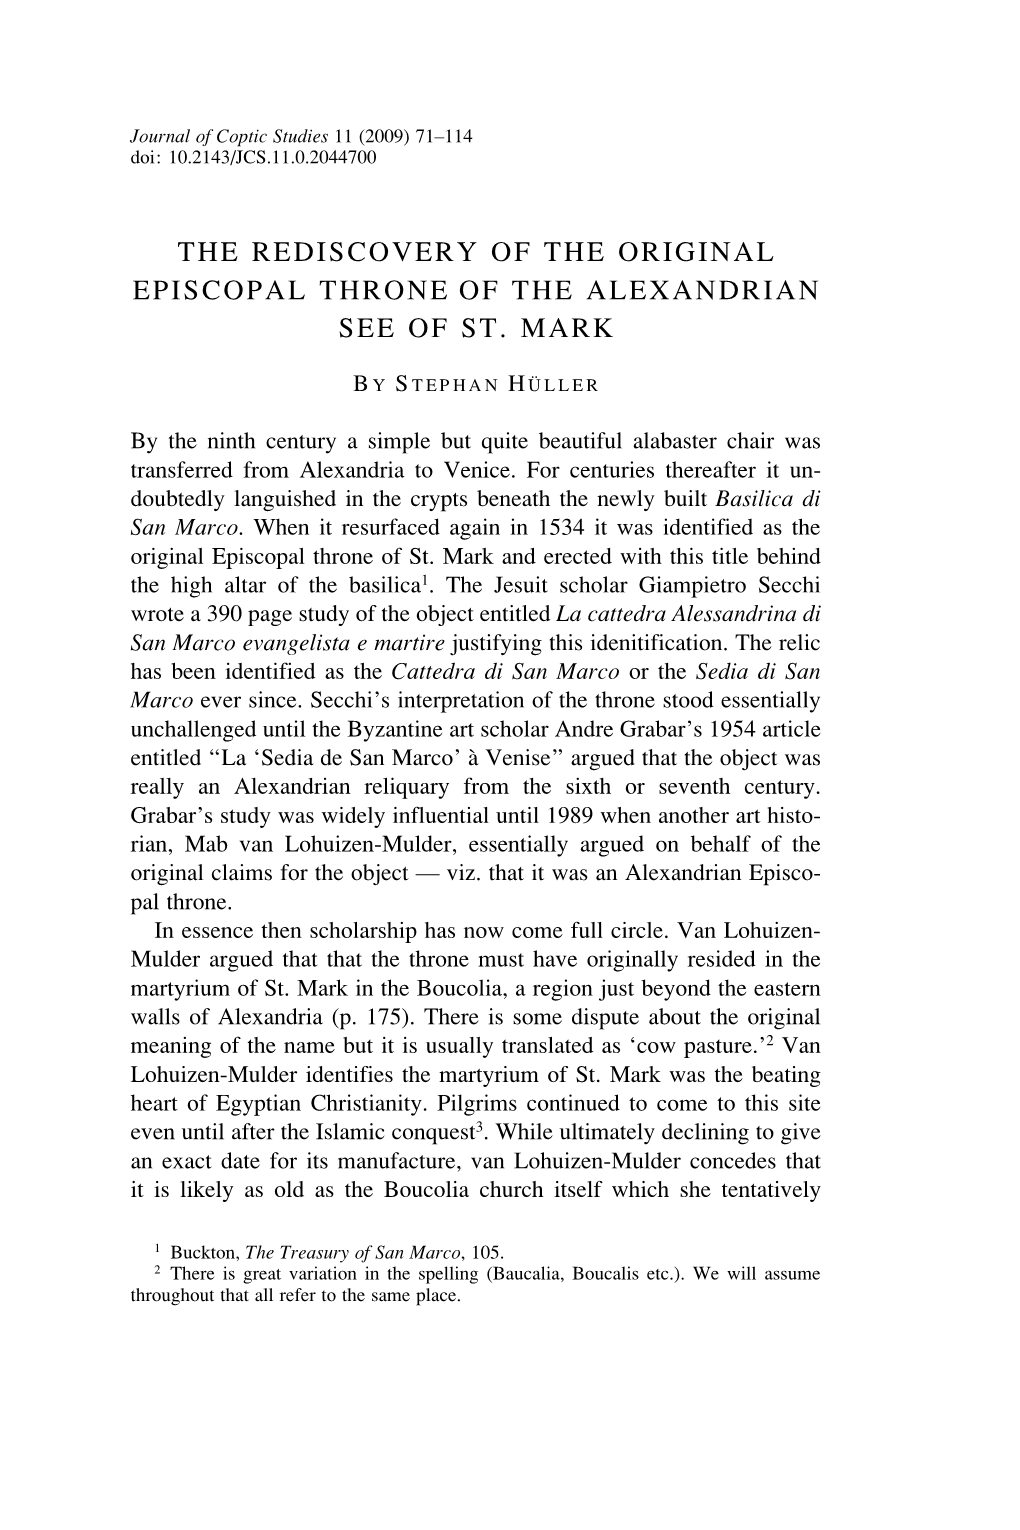 The Rediscovery of the Original Episcopal Throne of the Alexandrian See of St